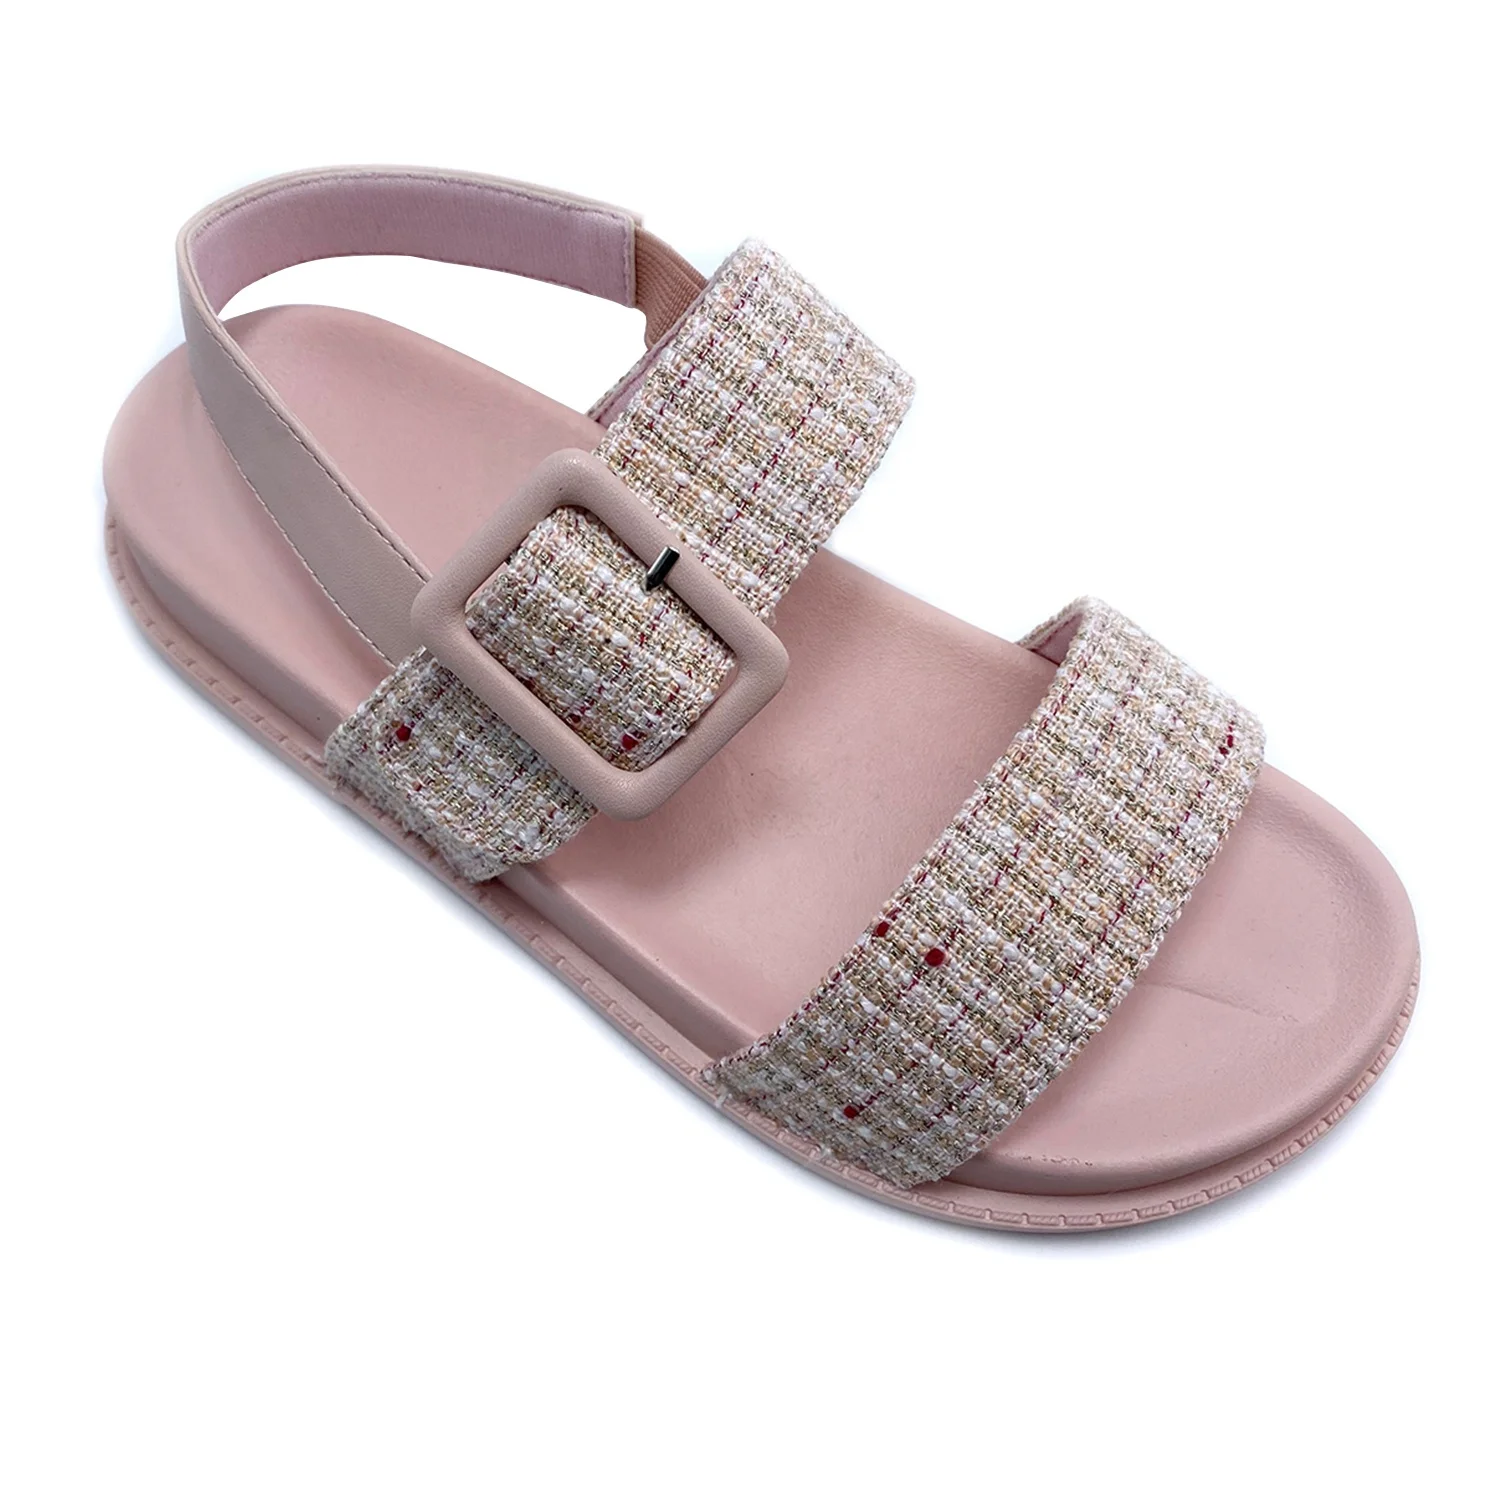 womens casual sandals for walking